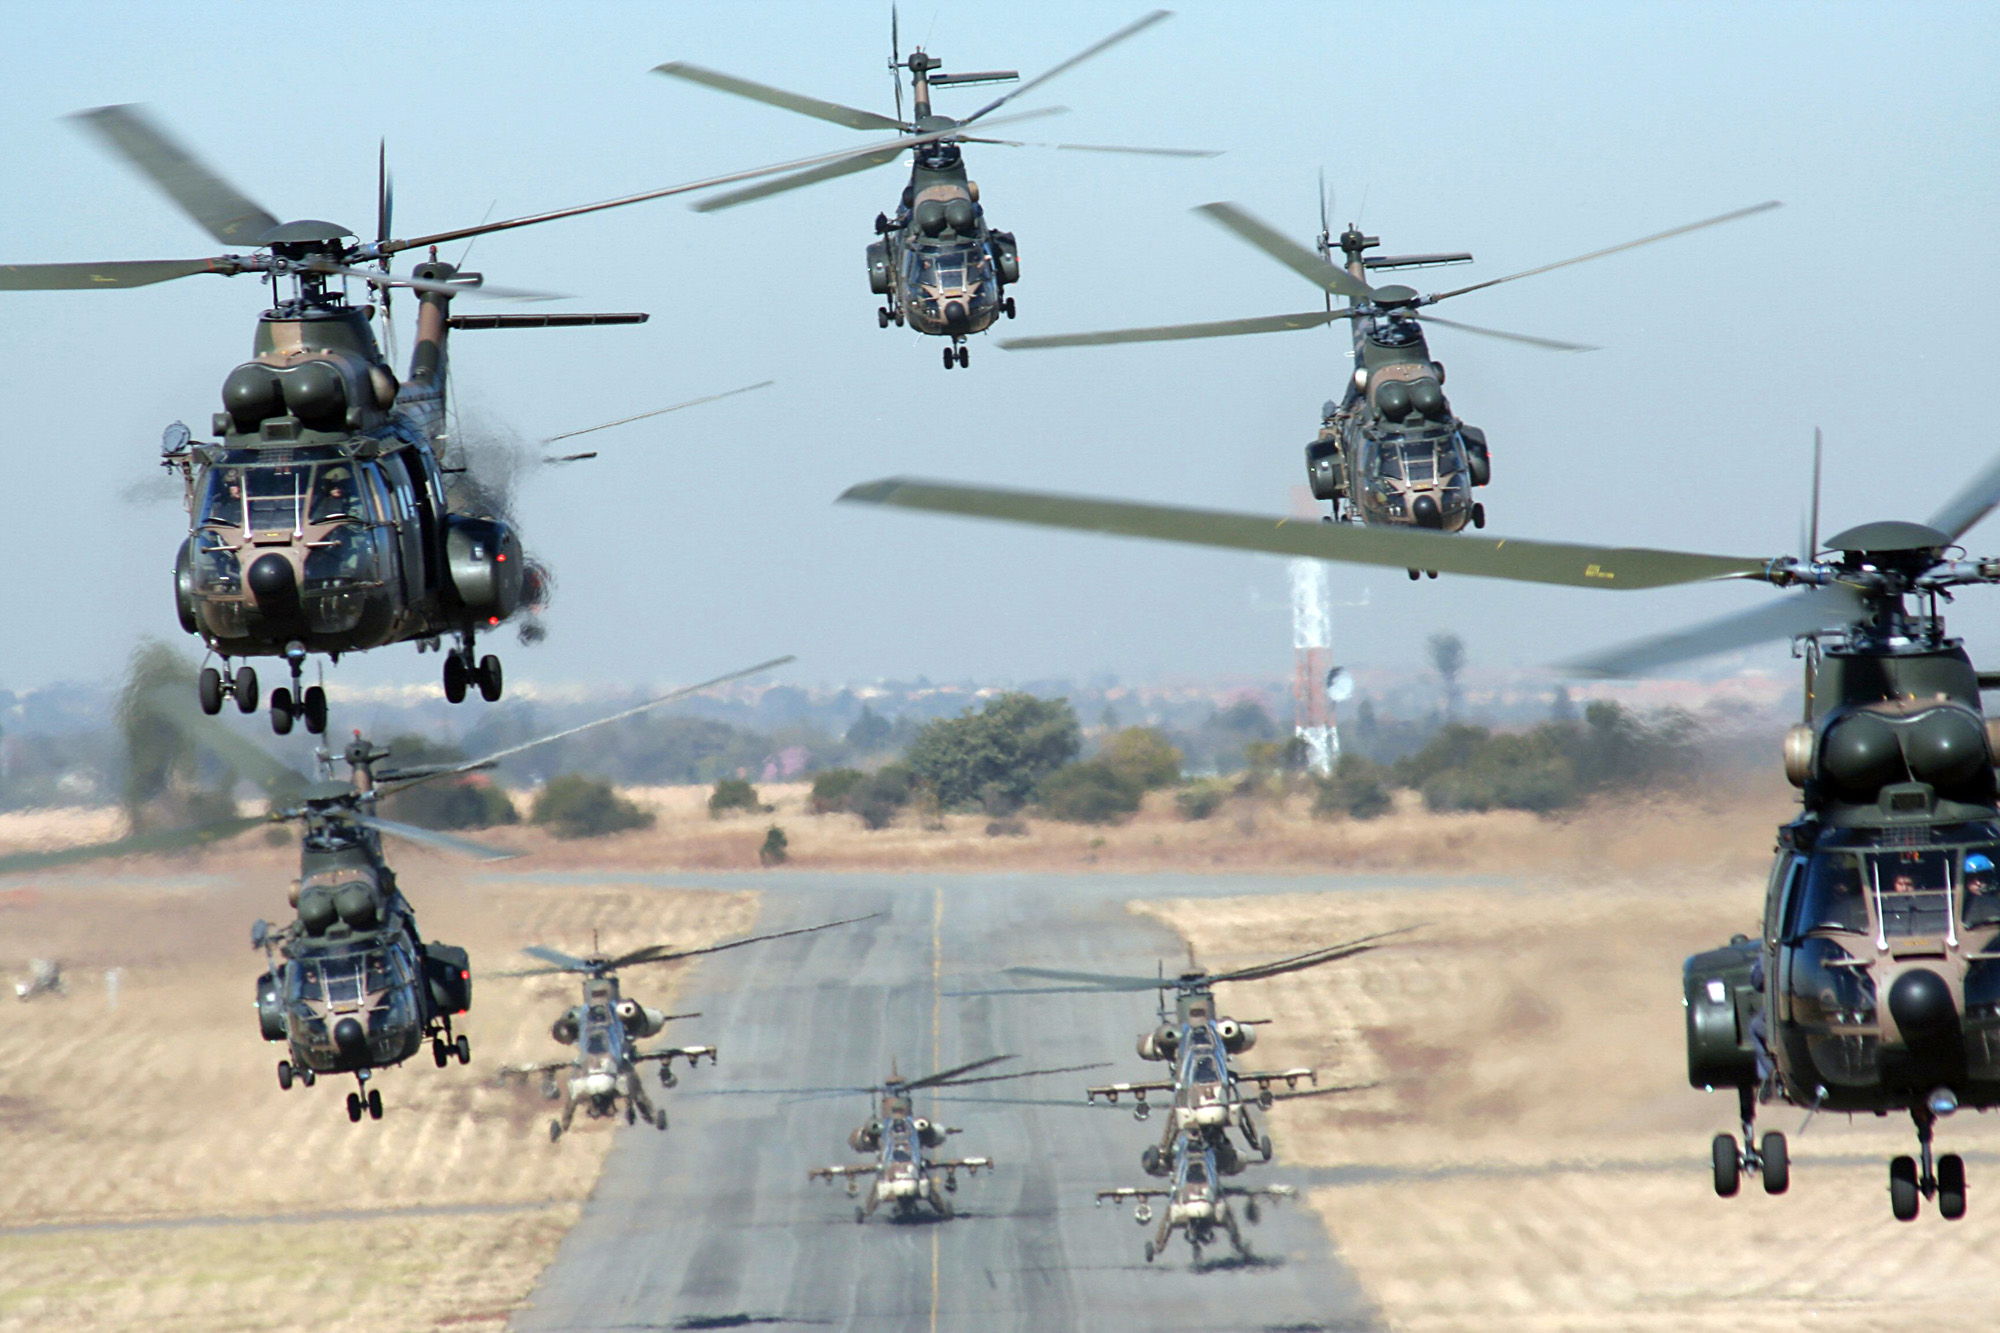 Fleet of helicopters taking to the skies over a runway